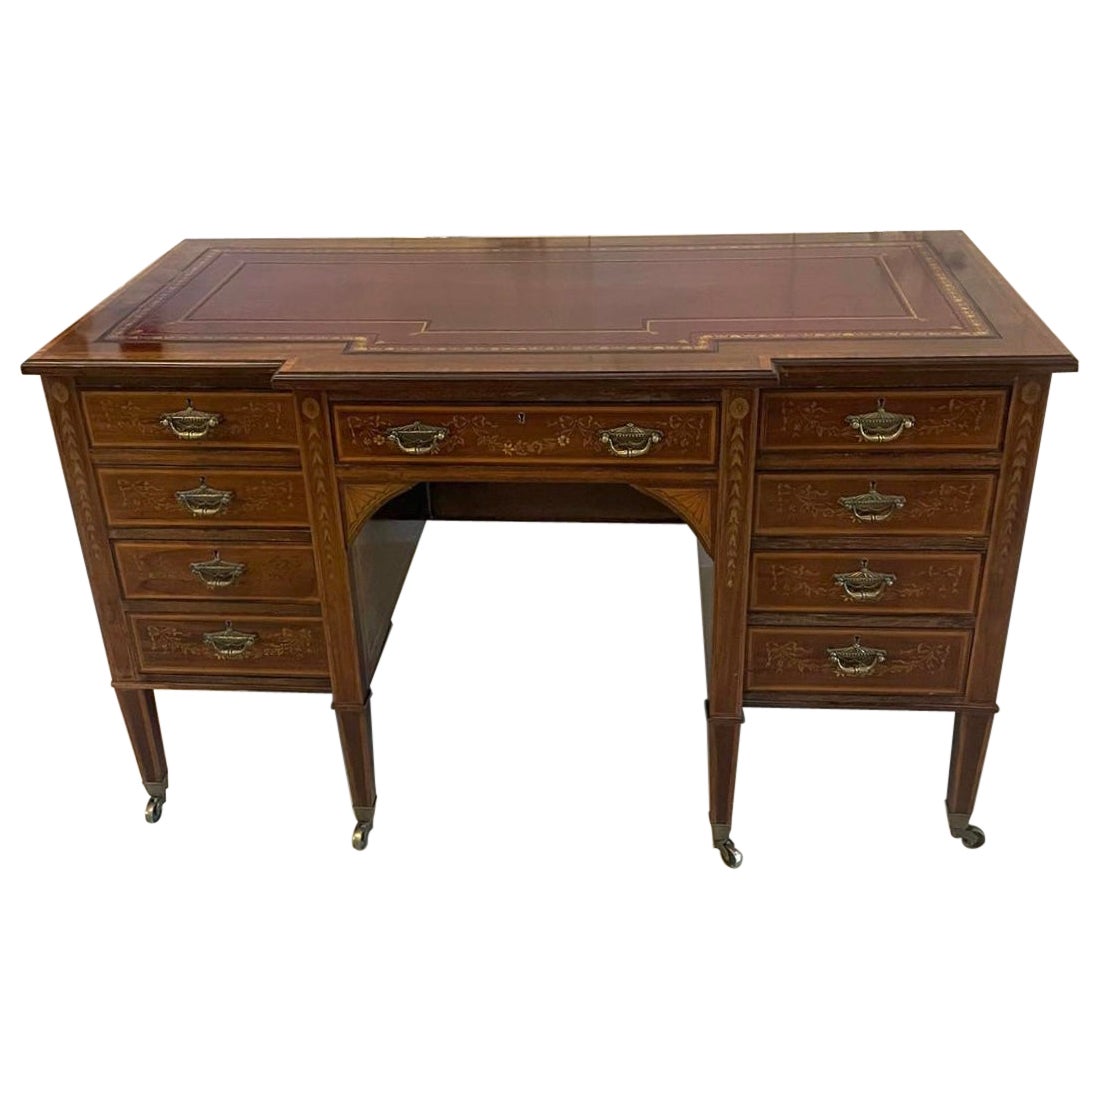 Quality Antique Victorian Mahogany Inlaid Kneehole Desk by Edwards and Roberts For Sale